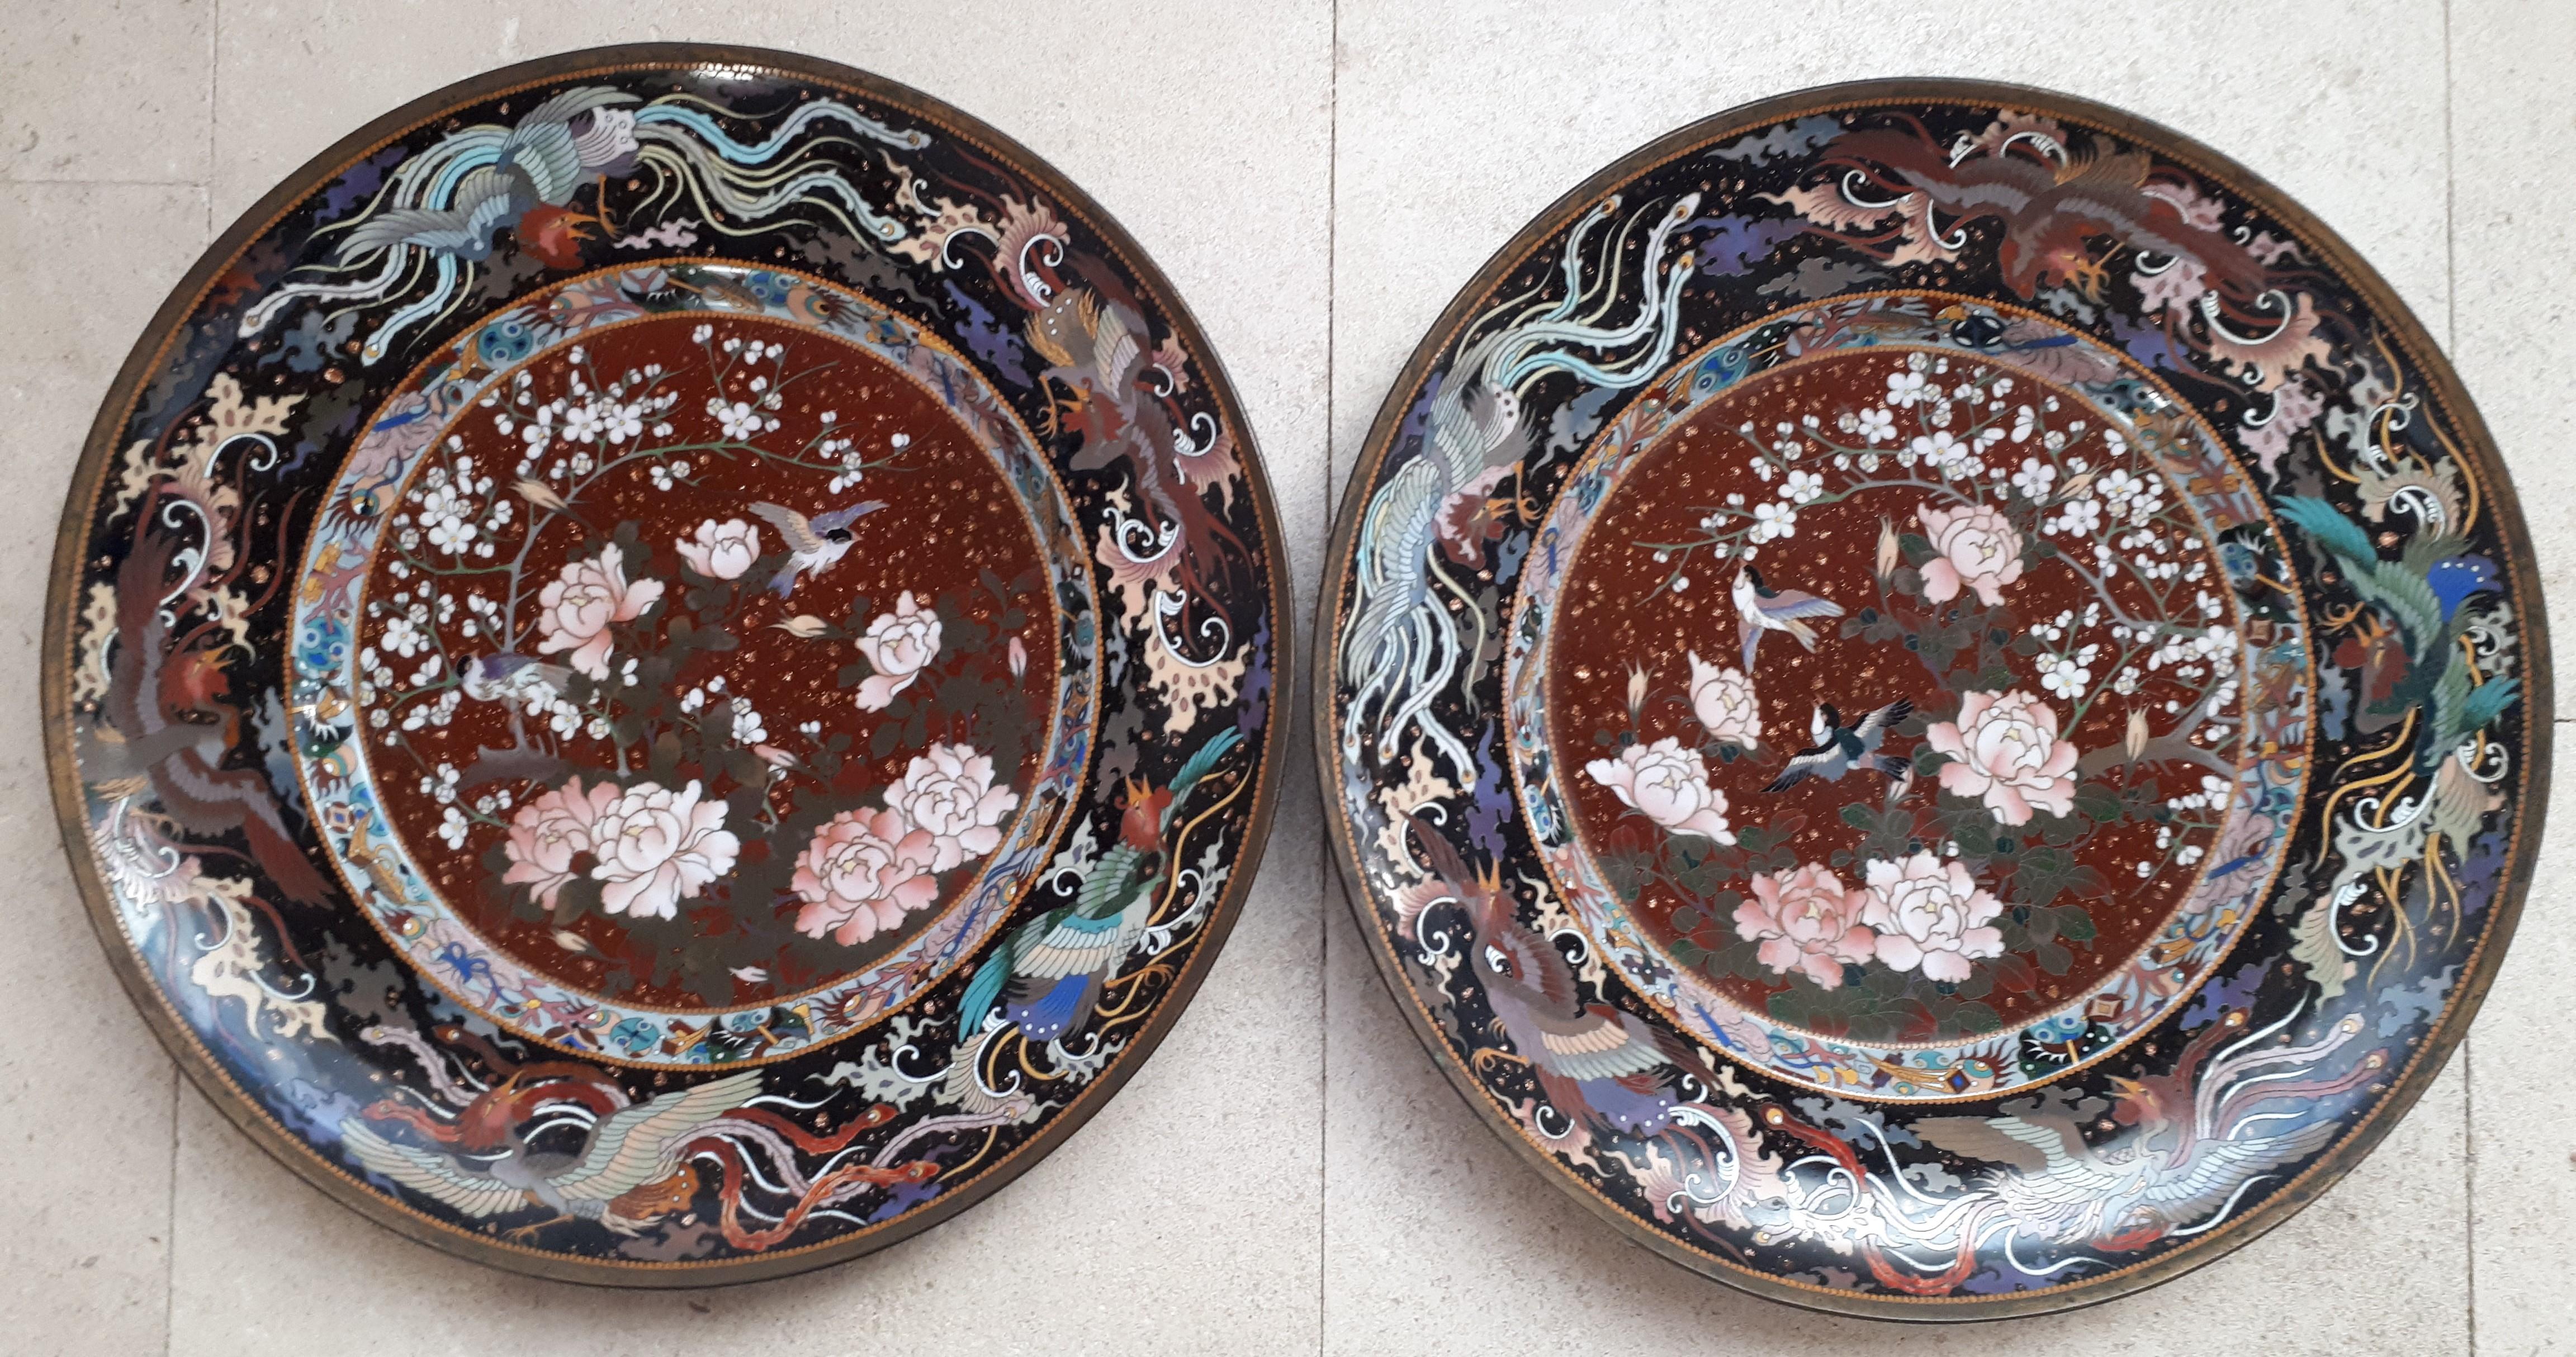 Pair of very finely cloisonné bronze and enamel dishes decorated with birds and flowers on a background with copper and gold inclusions. The wings of the dishes adorned with flying phoenixes. Note that these dishes are much more beautiful in real